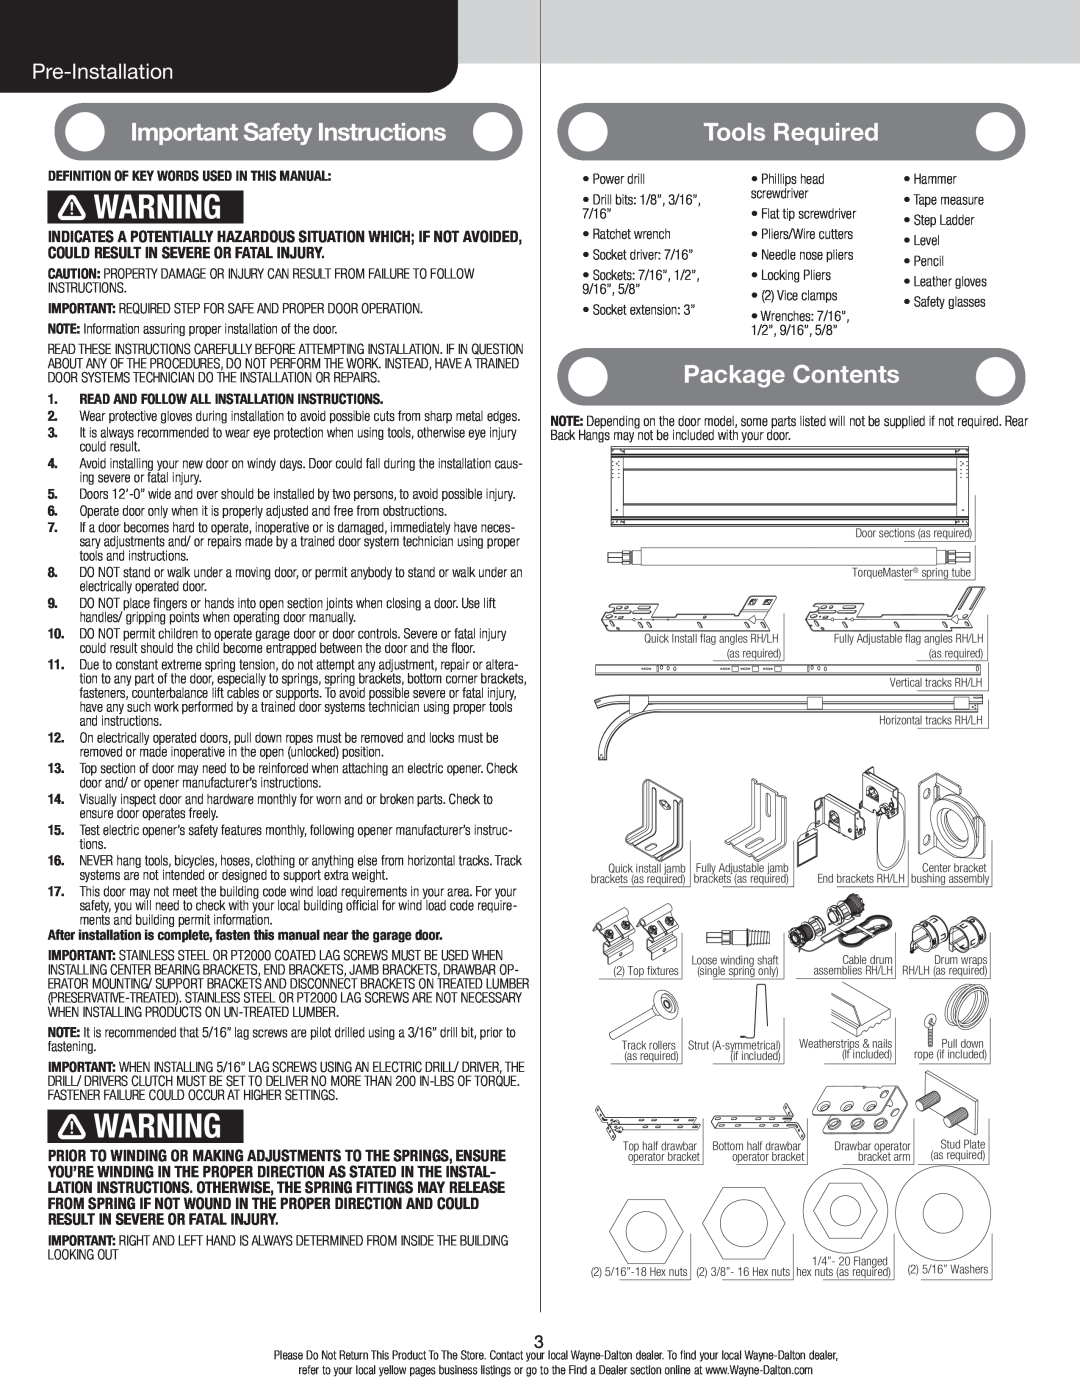 Wayne-Dalton 6100 Important Safety Instructions, Tools Required, Package Contents, Pre-Installation 